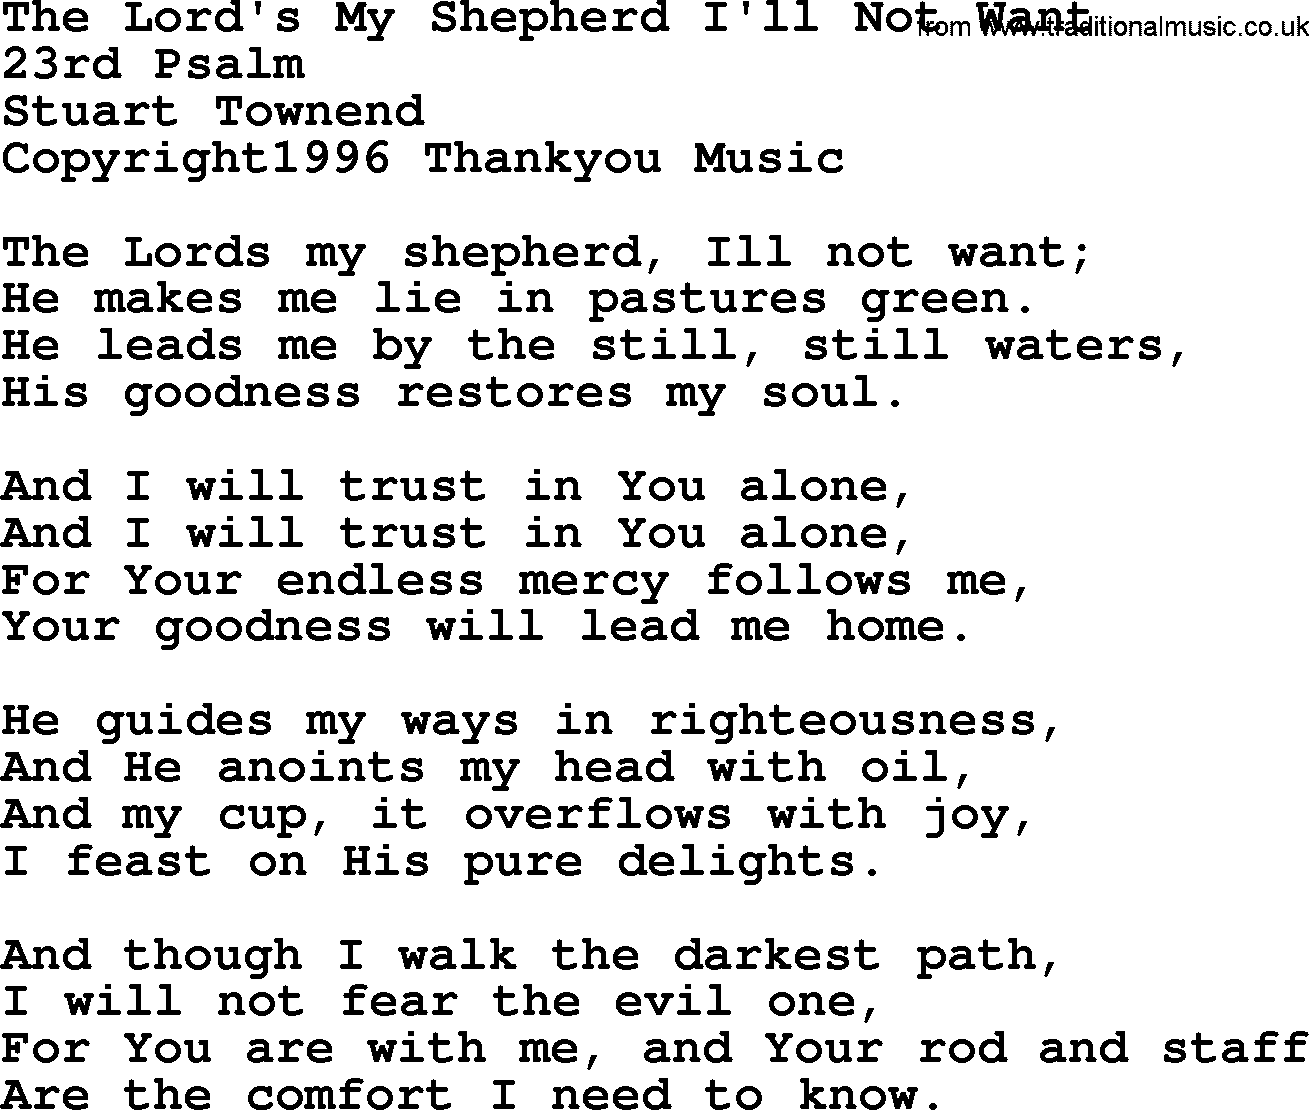 A collection of 500+ most sung Christian church hymns and songs, title: 23rs Psalm-The Lord's My Shepherd I'll Not Want~, lyrics, PPTX and PDF